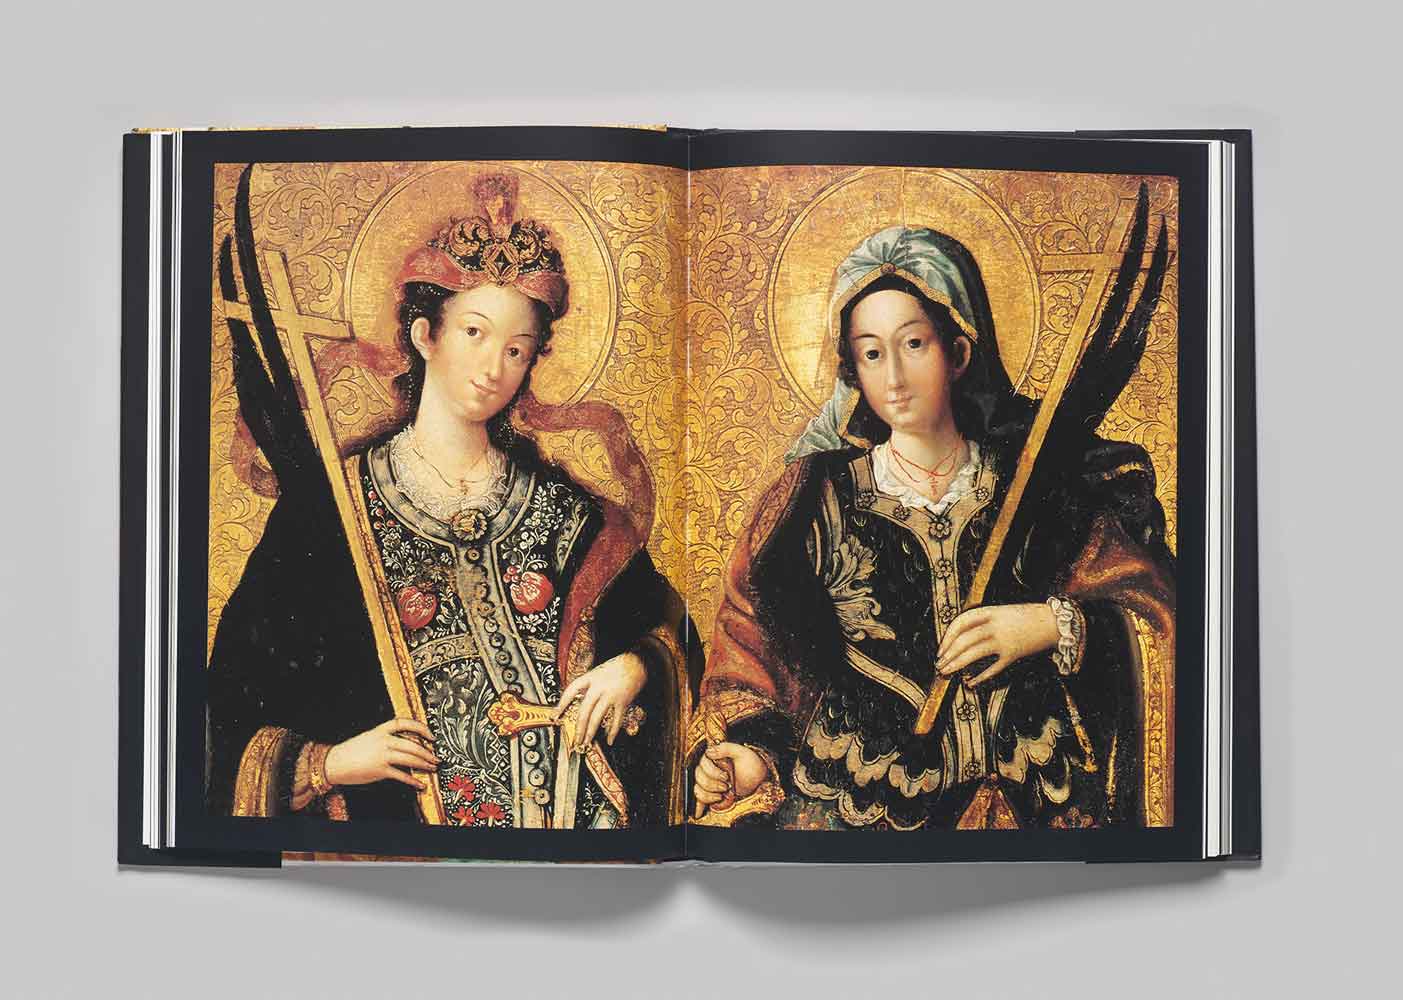 Two pages of a book featuring two elaborately adorned figures with halos and crosses against a gold background